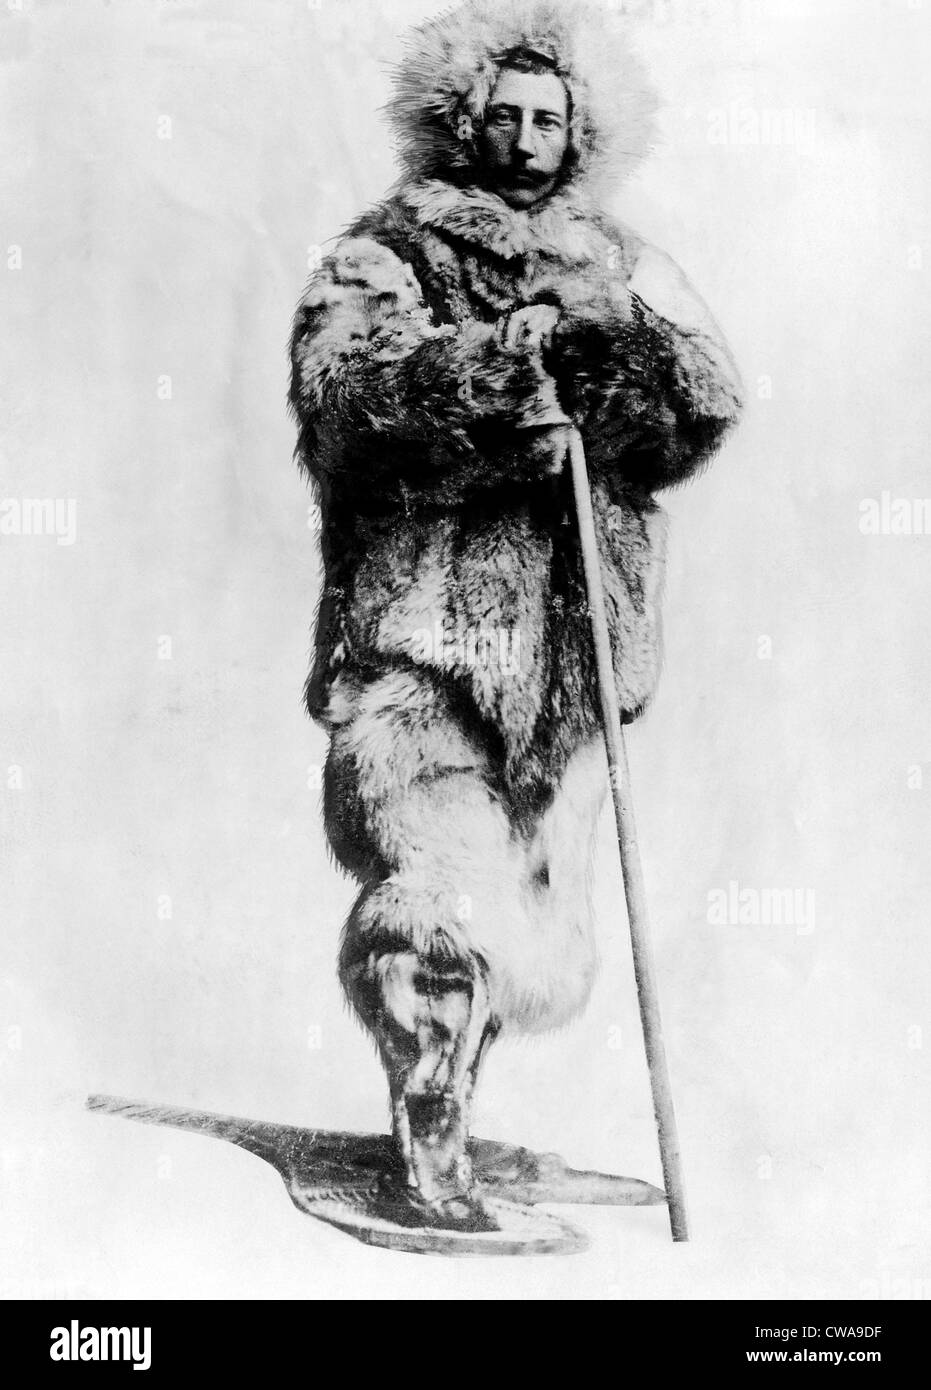 Roald Amundsen, the first person to reach the South Pole. The Norwegian explorer made it there in 1911. Photo taken in 1912. Stock Photo